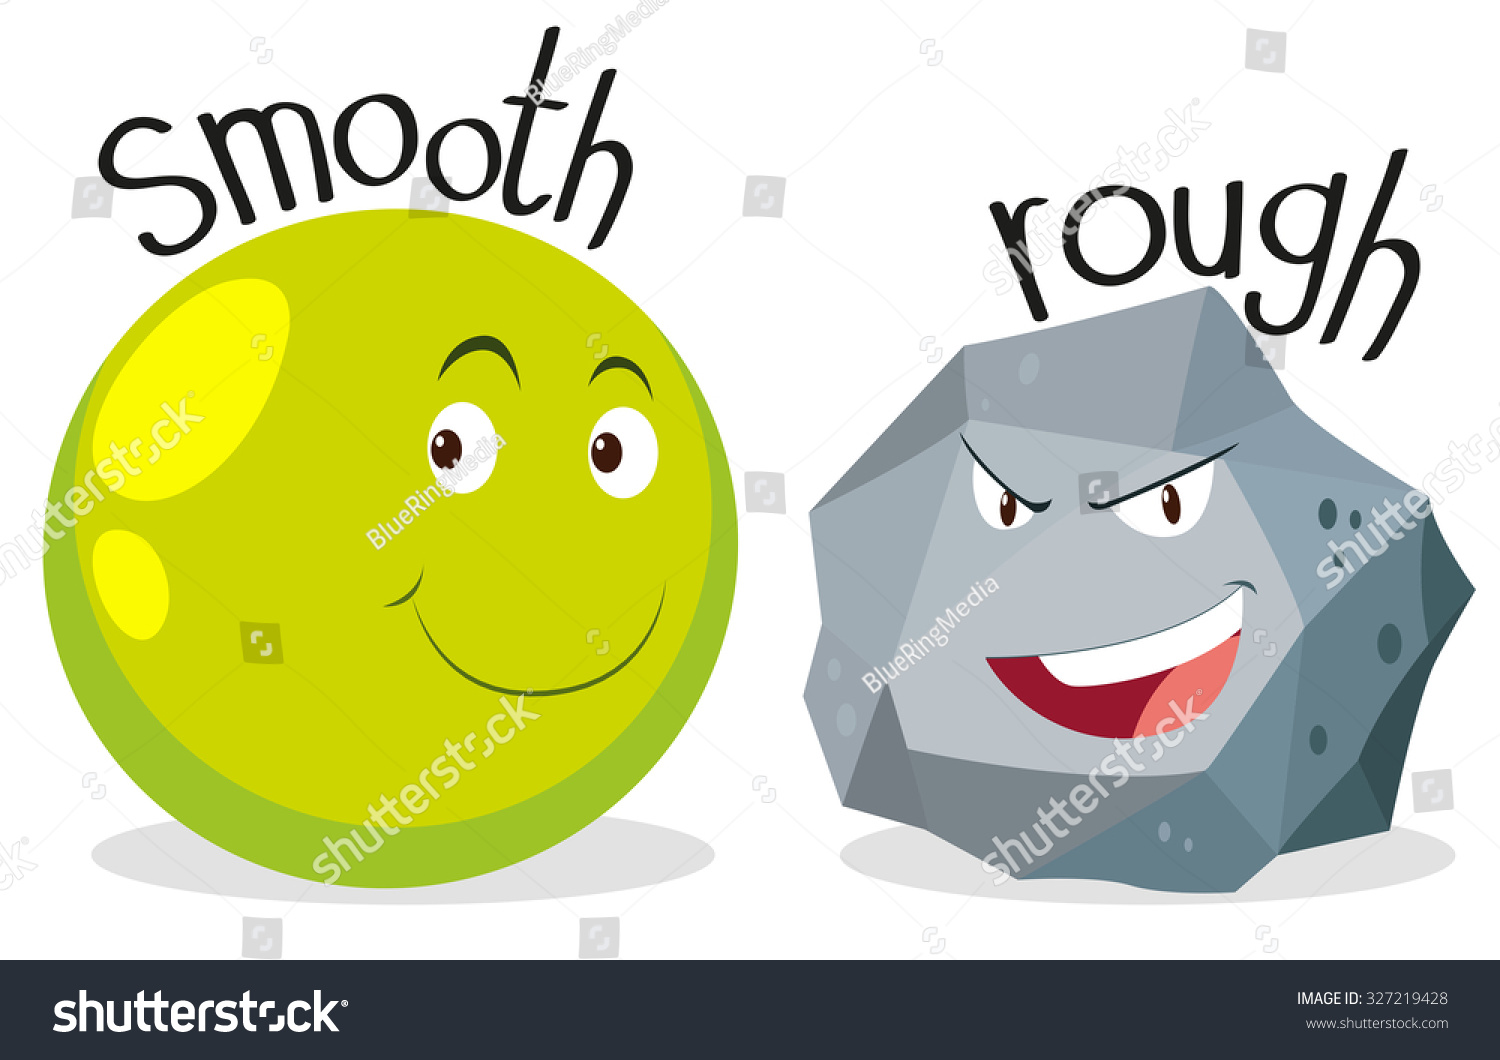 smooth objects clipart - photo #1